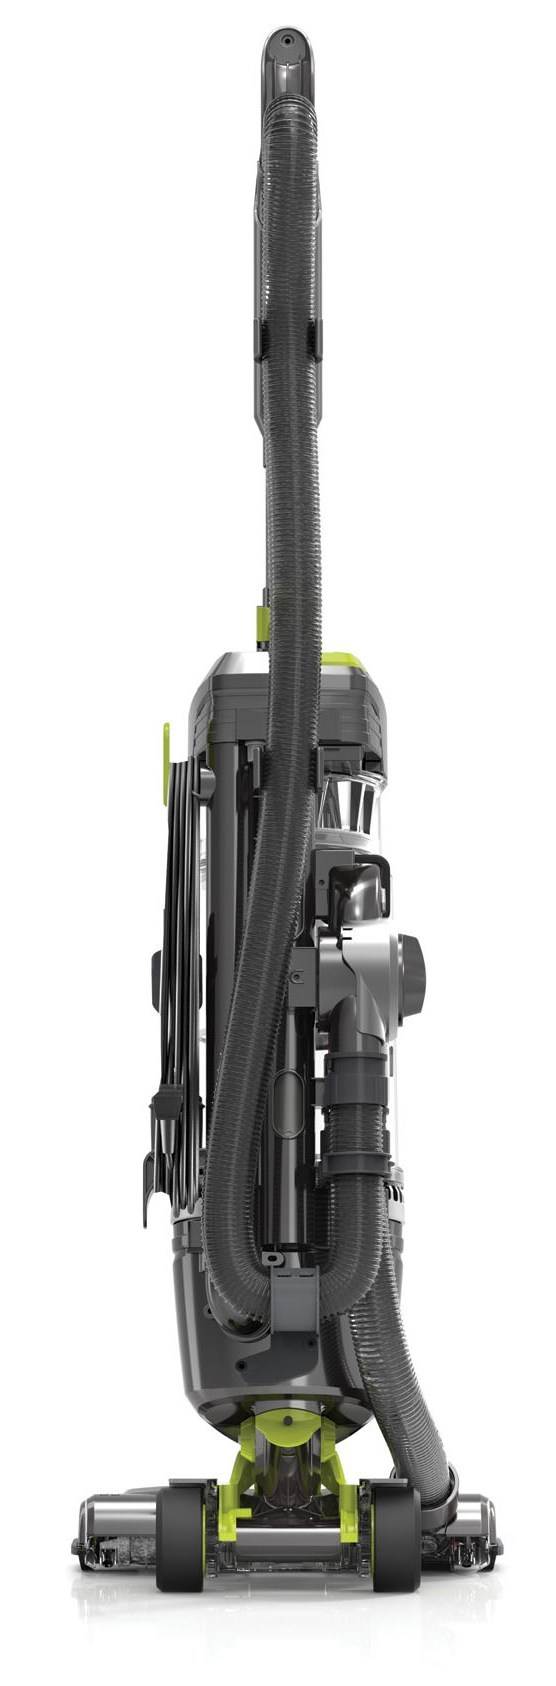 Hoover Air Pro Lightweight Bagless Upright Vacuum Carpet Cleaner, UH72450 - image 2 of 12